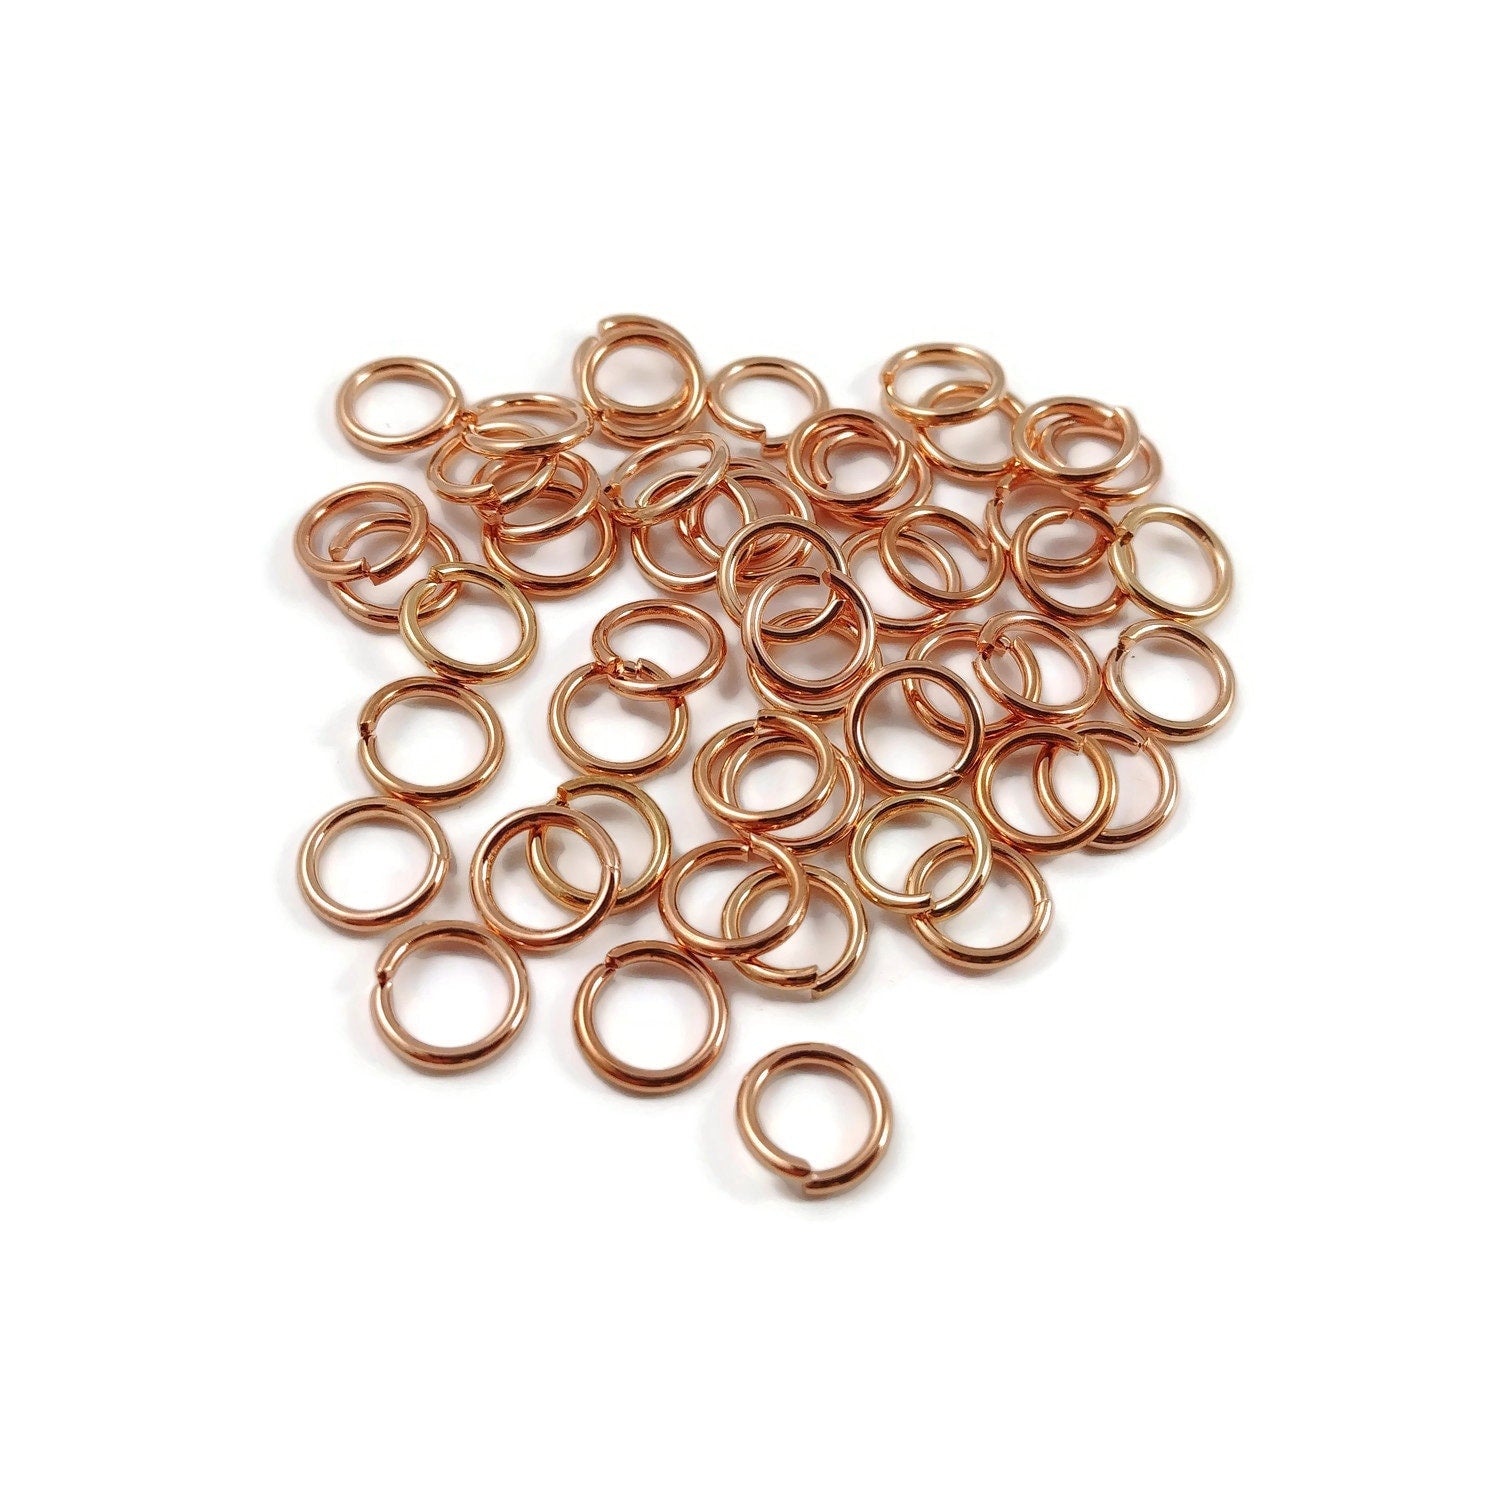 Rose gold stainless steel jump rings 7mm or 8mm - Jewelry findings